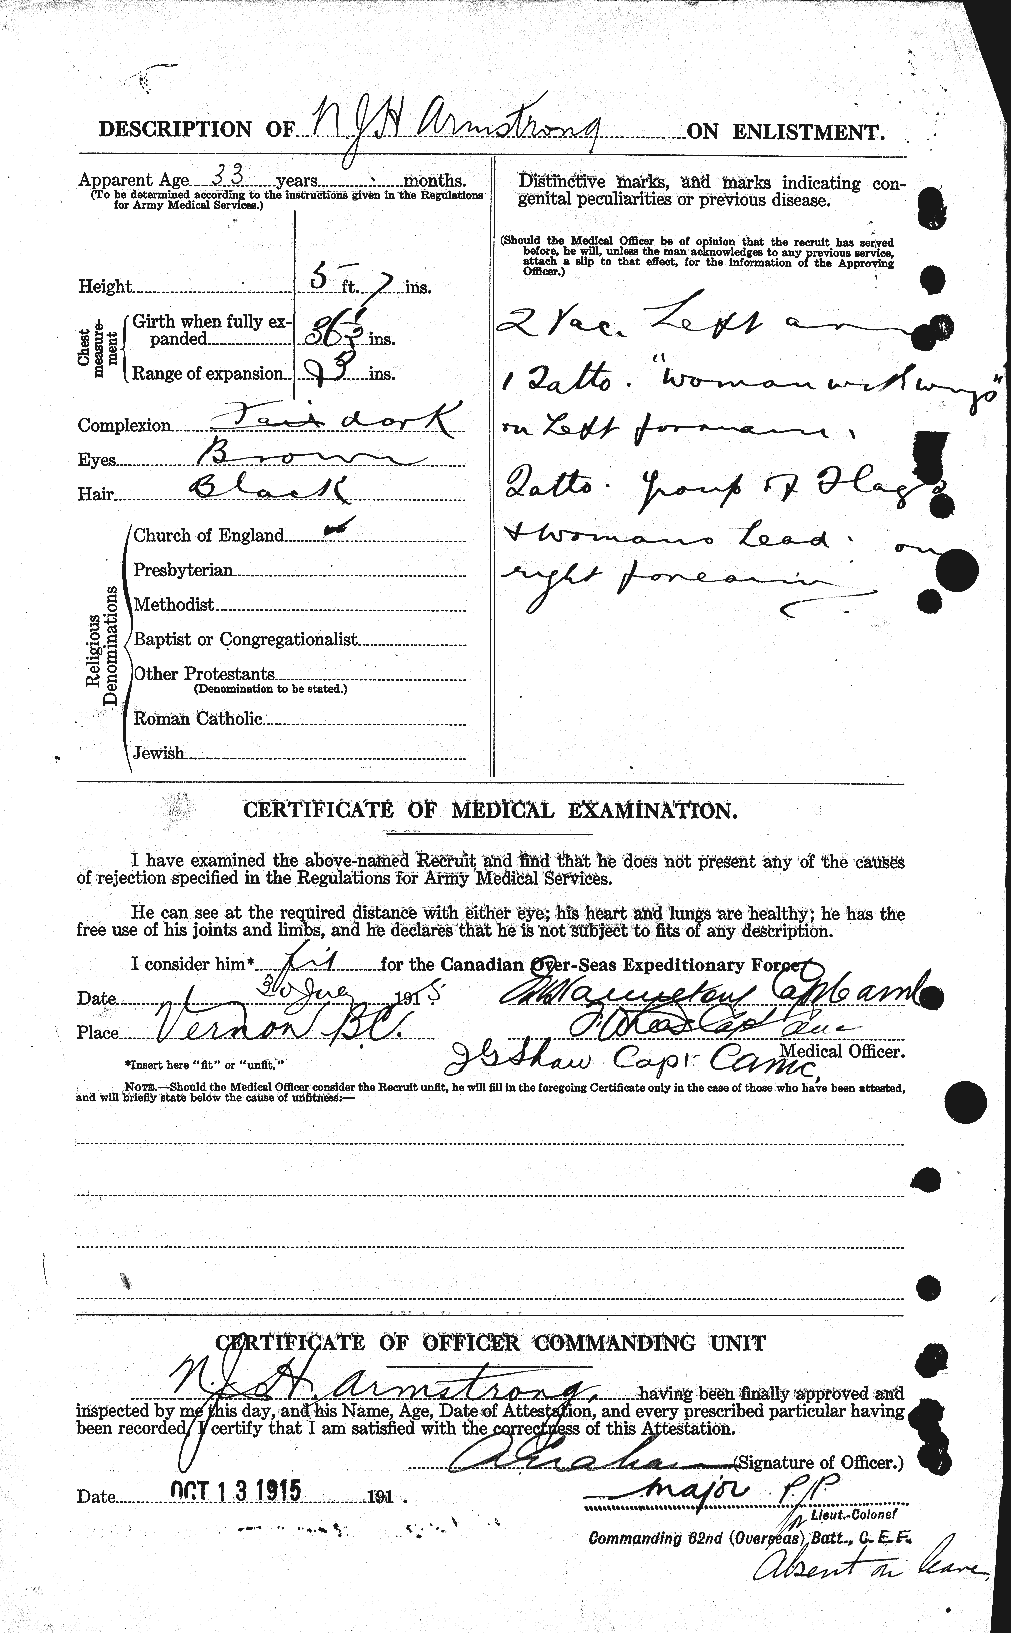 Personnel Records of the First World War - CEF 212737b